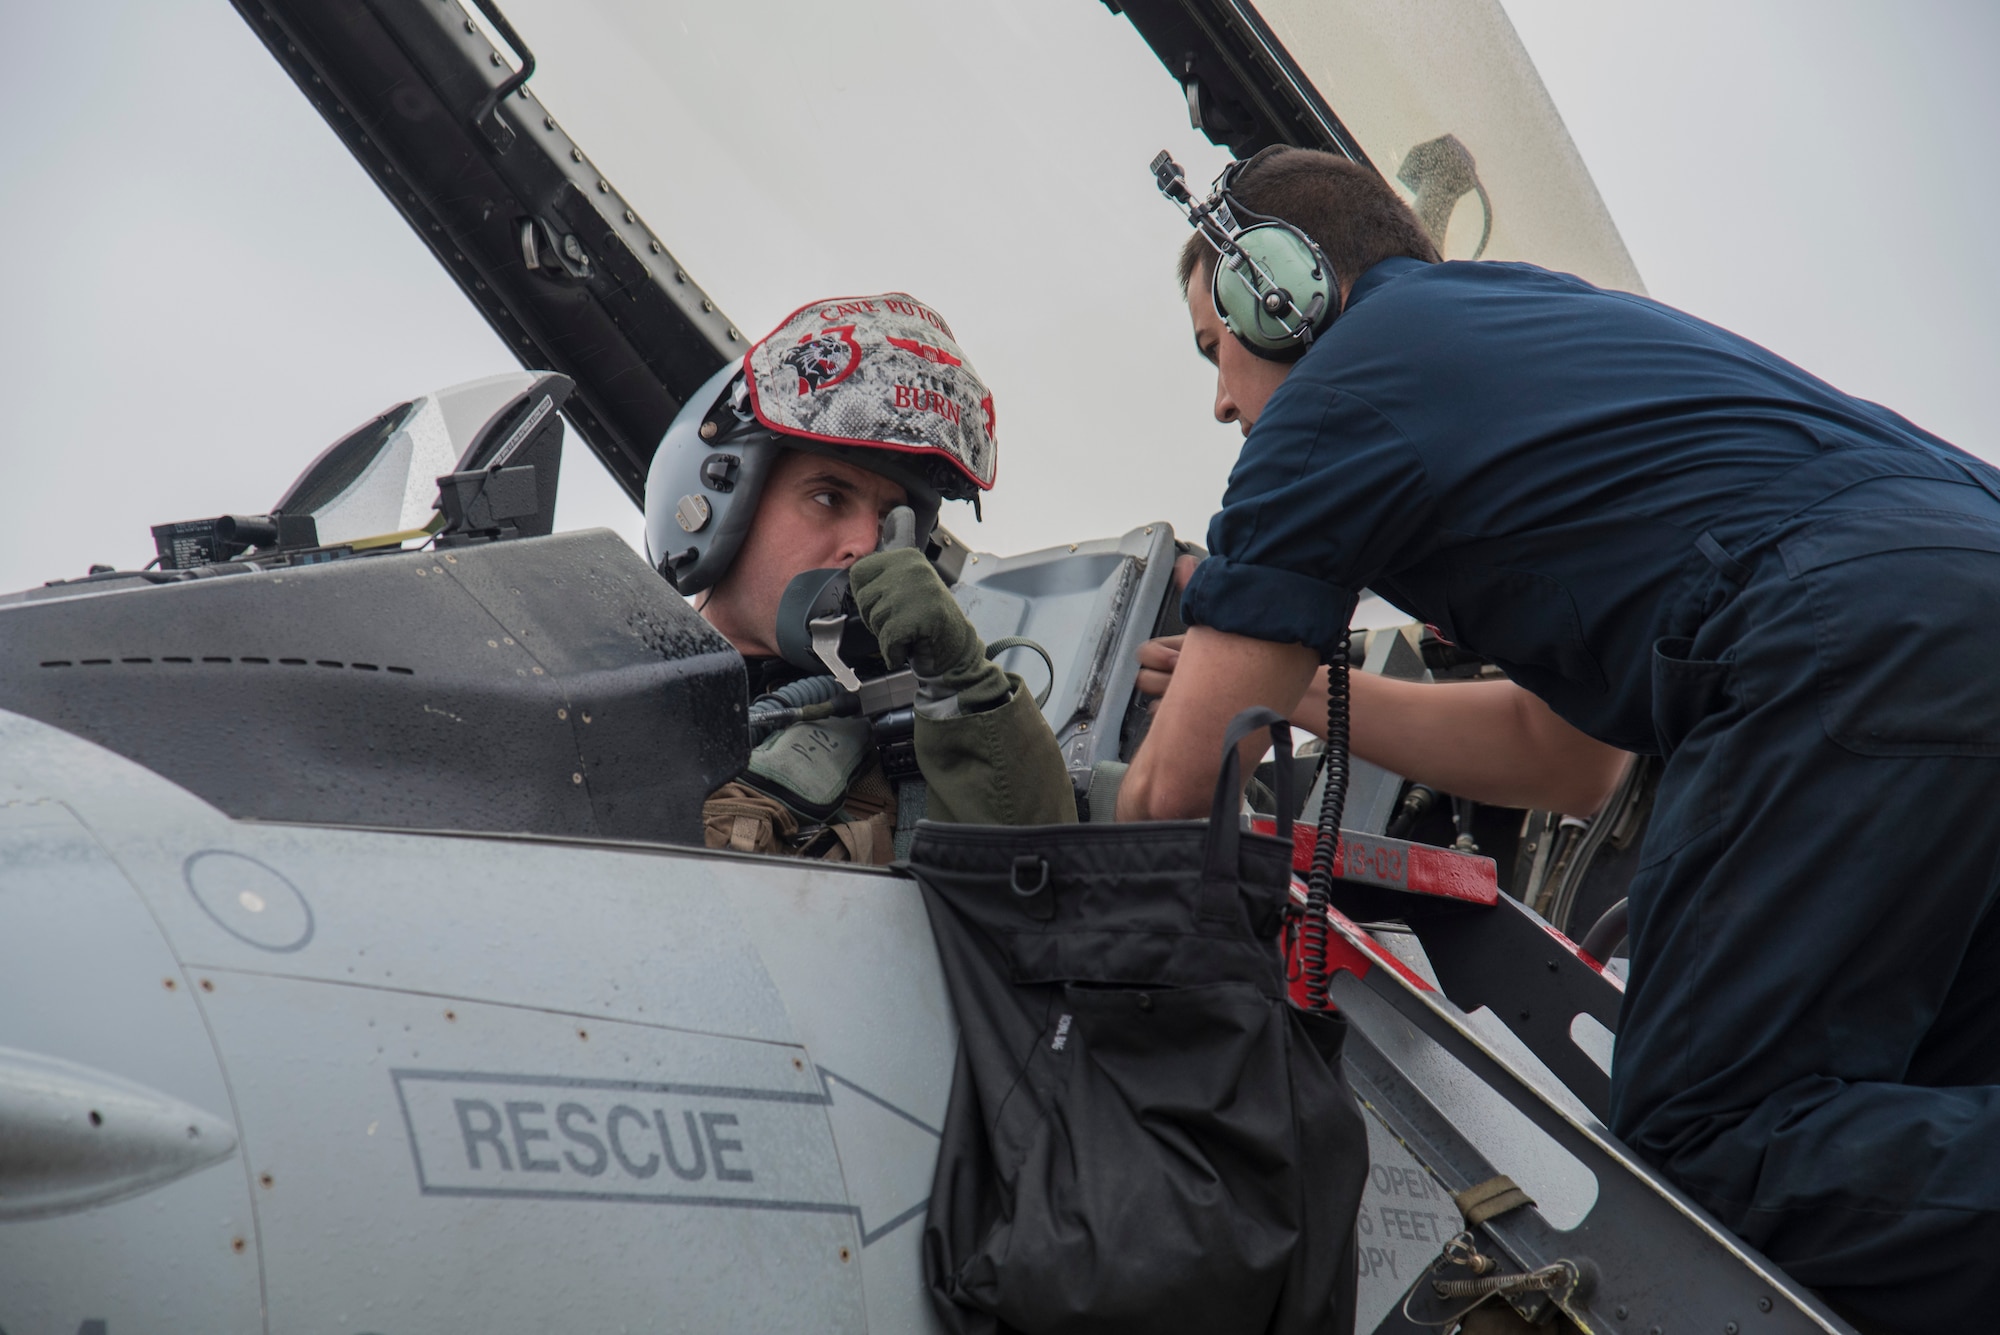 U.S. Air Force Airman 1st Class Mathew Flores, a crew chief with the 35th Aircraft Maintenance Squadron, straps Capt. Nicolas Dewulf, a pilot with the 13th Fighter Squadron, into an F-16 Fighting Falcon at Misawa Air Base, Japan, May 4, 2016. After climbing into the cockpit, a pilot’s vest must be connected to the parachute which will deploy in the event of an ejection. Crew chiefs are responsible for inspecting the aircraft for mechanical and electronic issues before and after flight. (U.S. Air Force photo by Airman 1st Class Jordyn Fetter)